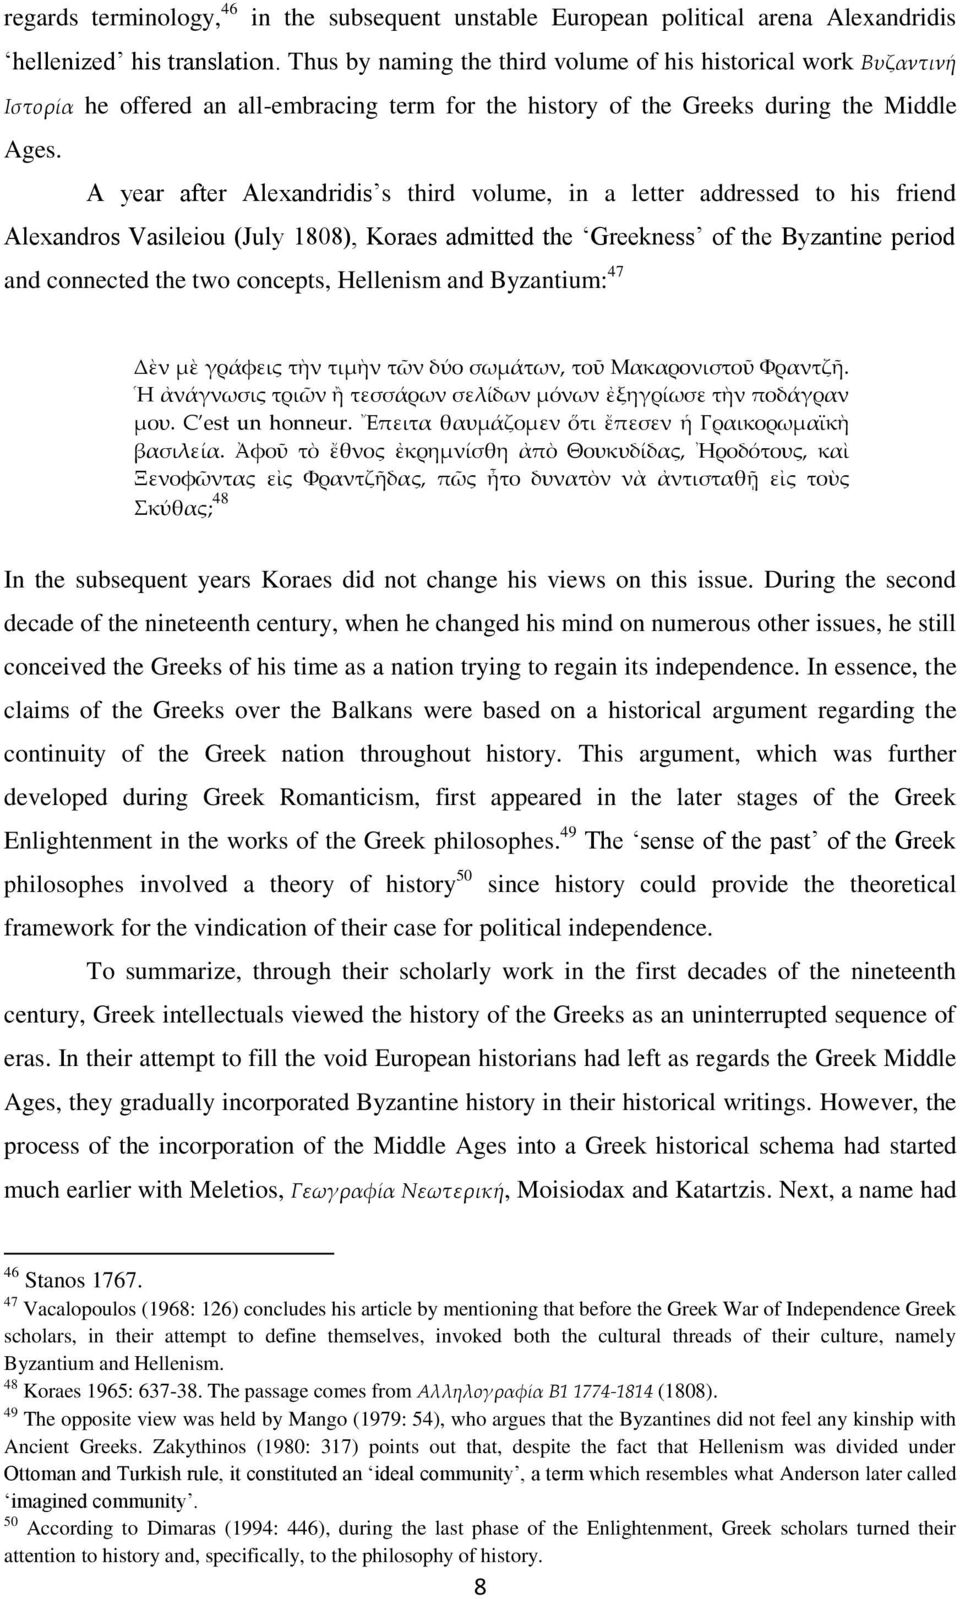 A year after Alexandridis s third volume, in a letter addressed to his friend Alexandros Vasileiou (July 1808), Koraes admitted the Greekness of the Byzantine period and connected the two concepts,